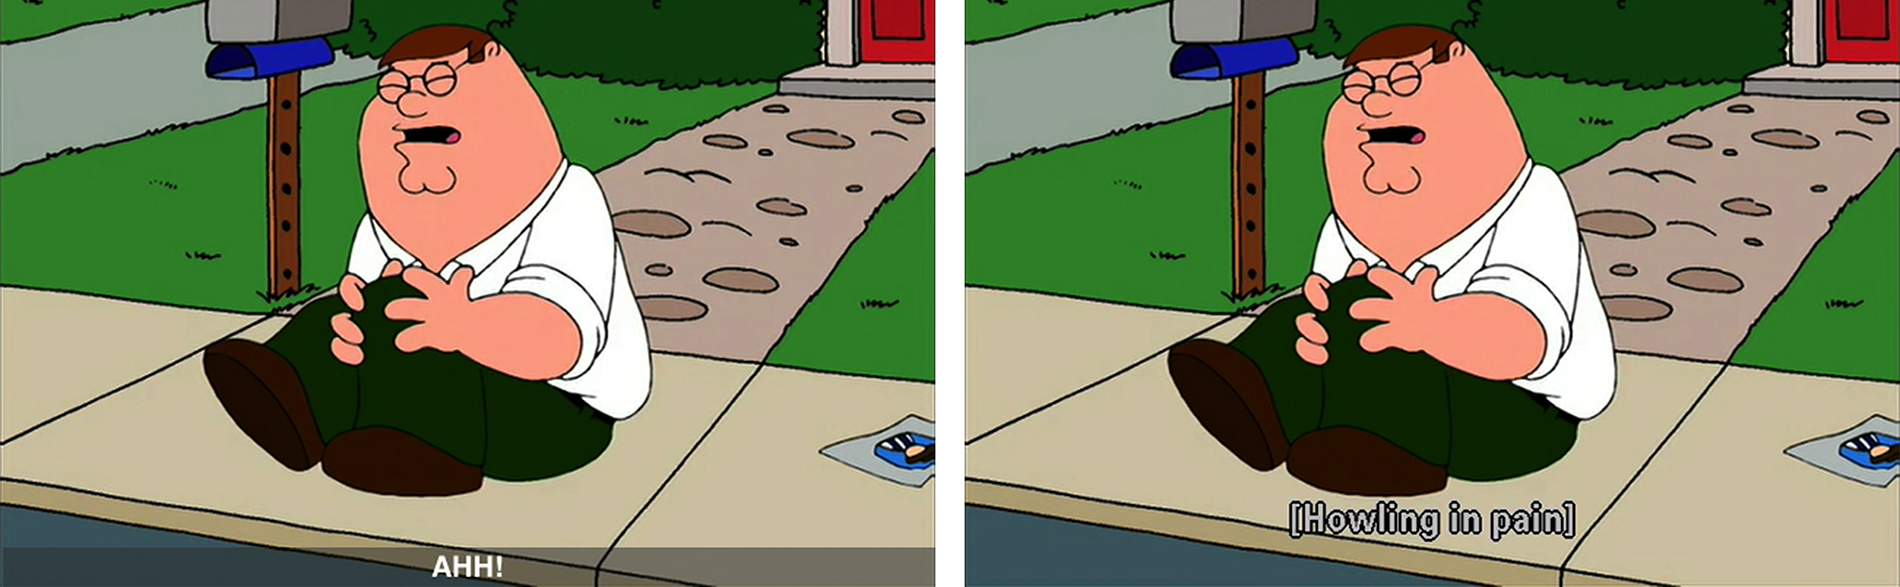 A comparison of two identical frames from an episode of Family Guy on DVD featuring Peter Griffin holding his knee in pain while sitting on the sidewalk outside his house. Frame 1: AHH! Frame 2: [Howling in pain]. Each frame is pulled from a different caption track on the DVD release.